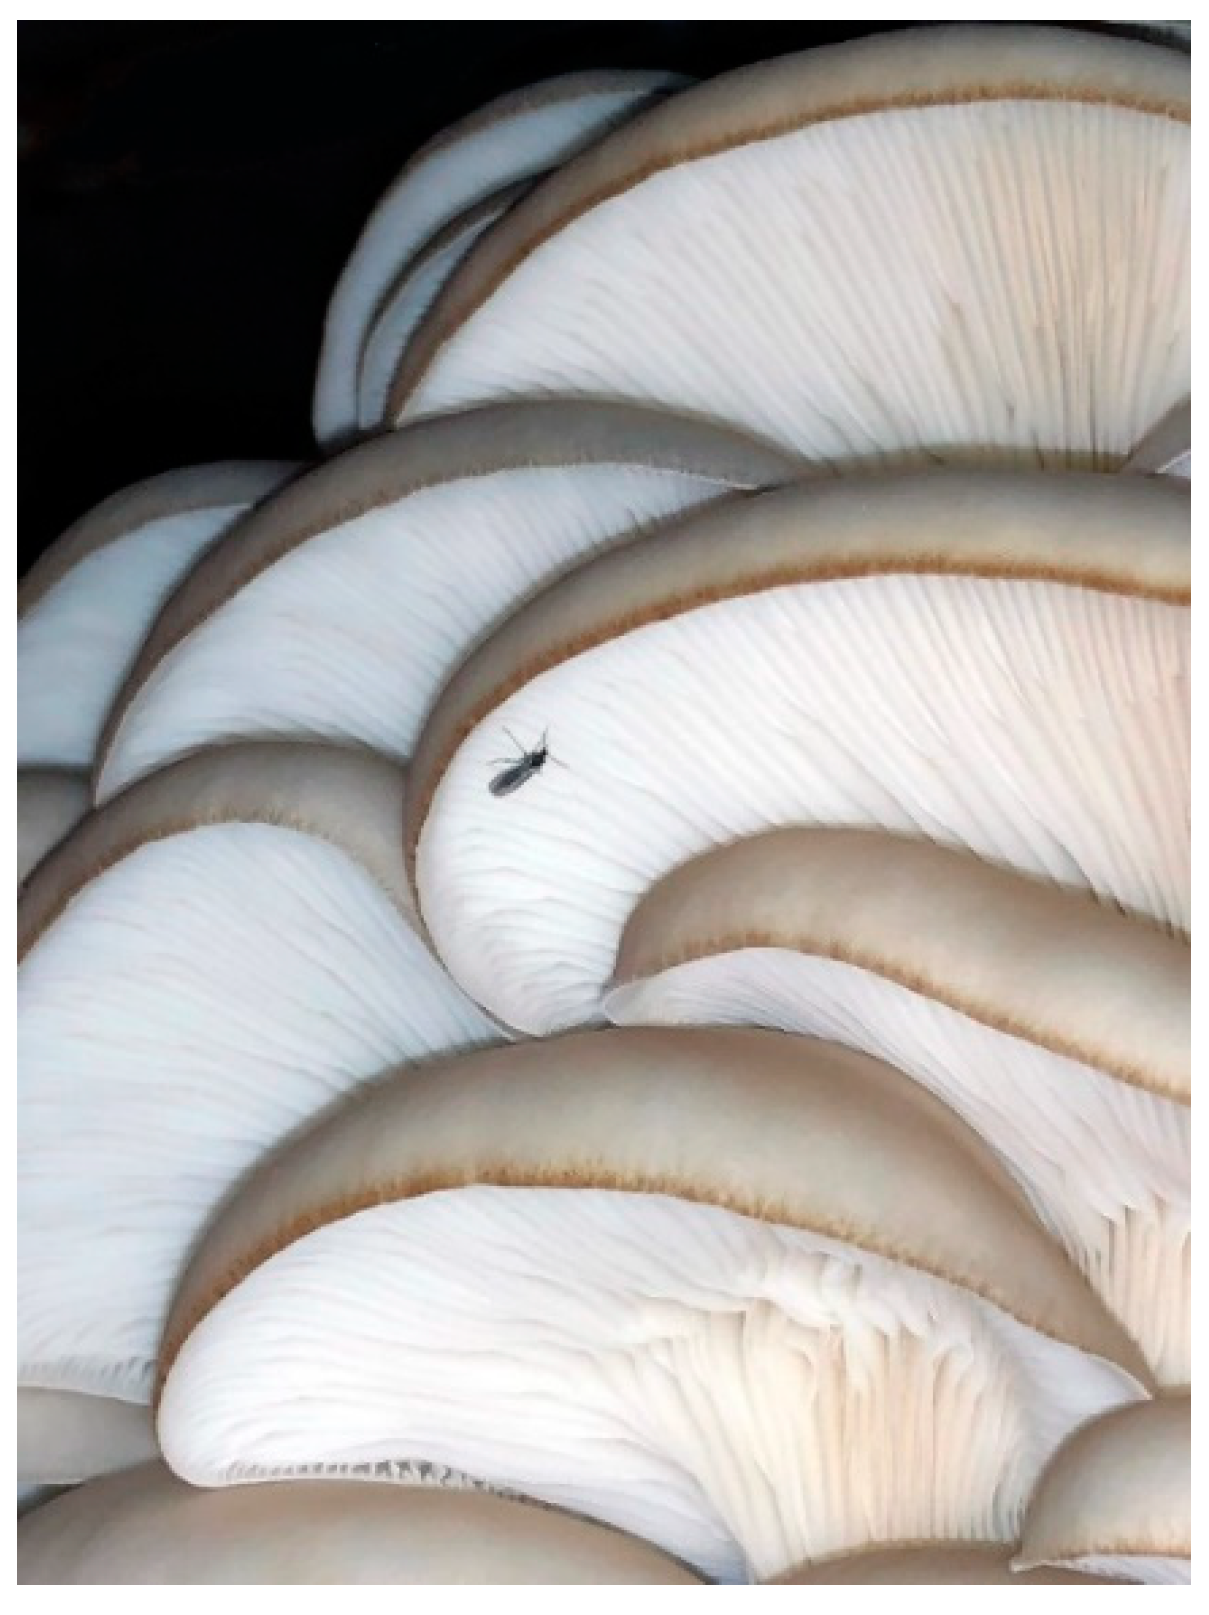 Insects | Free Full-Text | Microbial Control Agents for Fungus Gnats  (Diptera: Sciaridae: Lycoriella) Affecting the Production of Oyster  Mushrooms, Pleurotus spp.